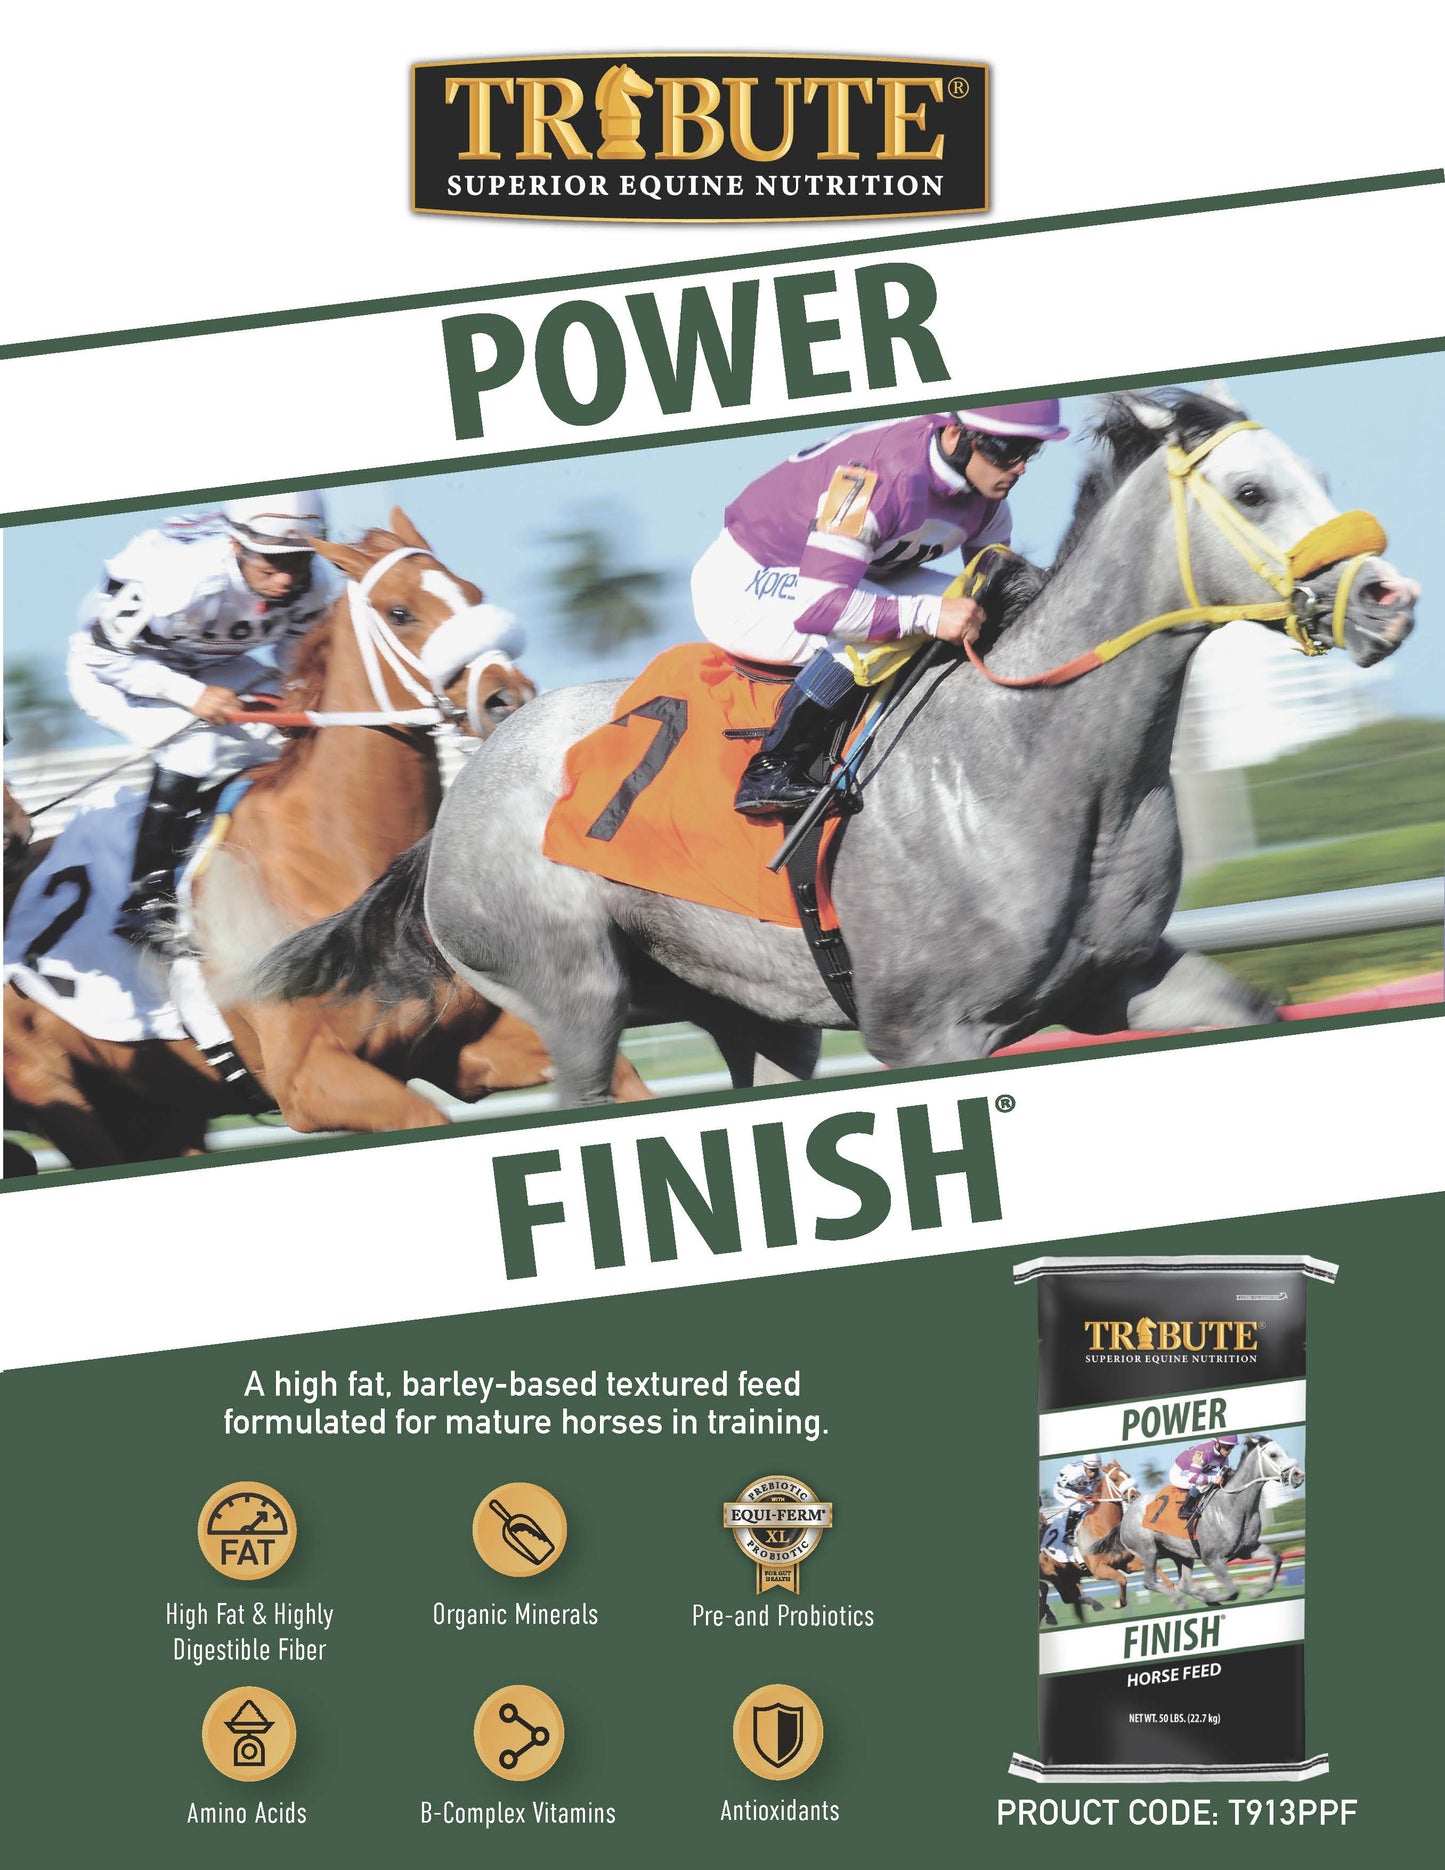 Power Finish®, Textured, Corn-Free Feed for Race Horses